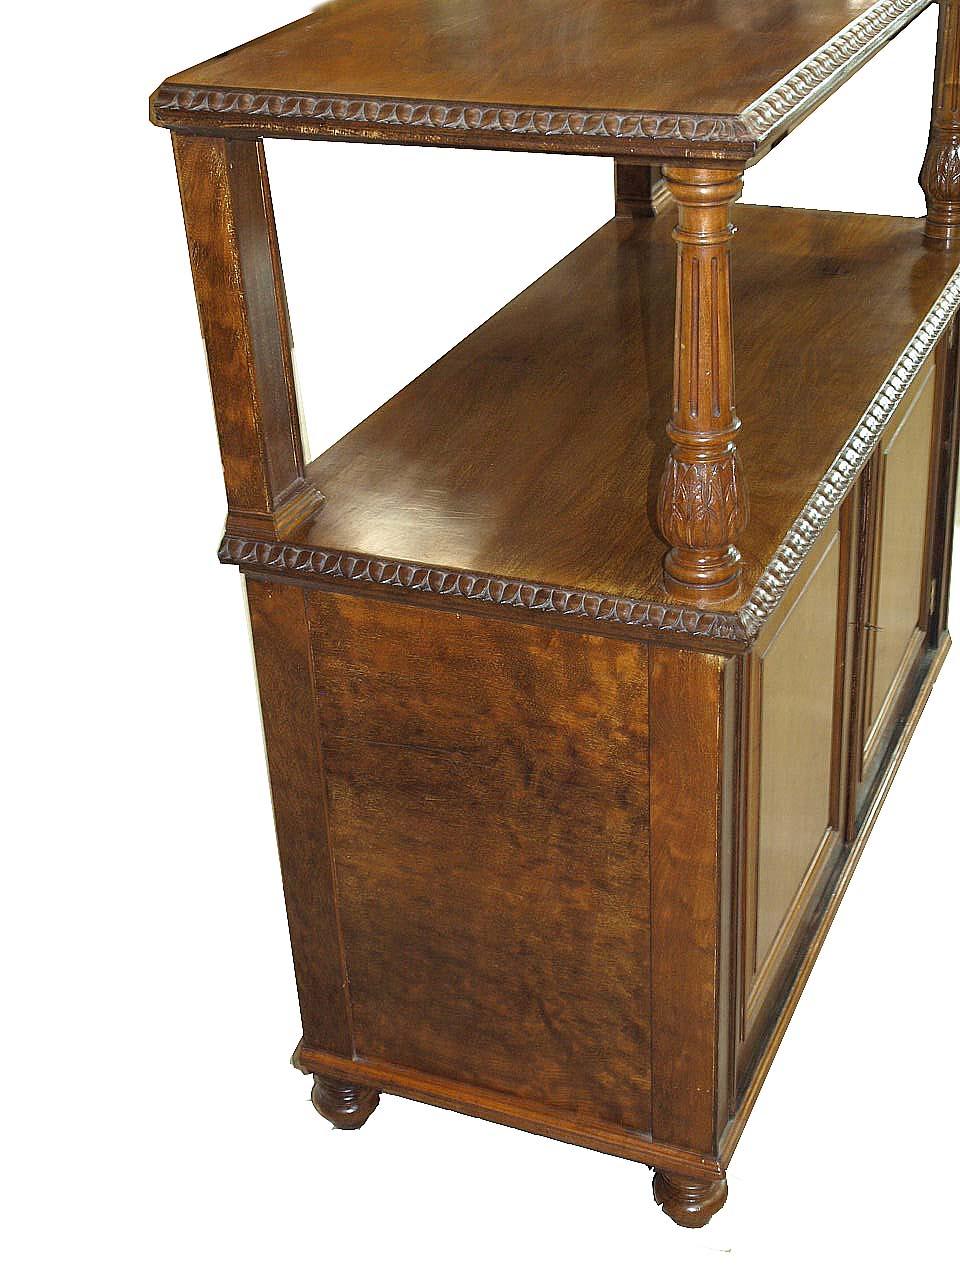 English mahogany two tier server, the top is supported in the front by carved and fluted columns and molded pilasters in the rear, both top and lower surface have beautifully carved molding. The sides feature the highly desirable ''plum pudding''